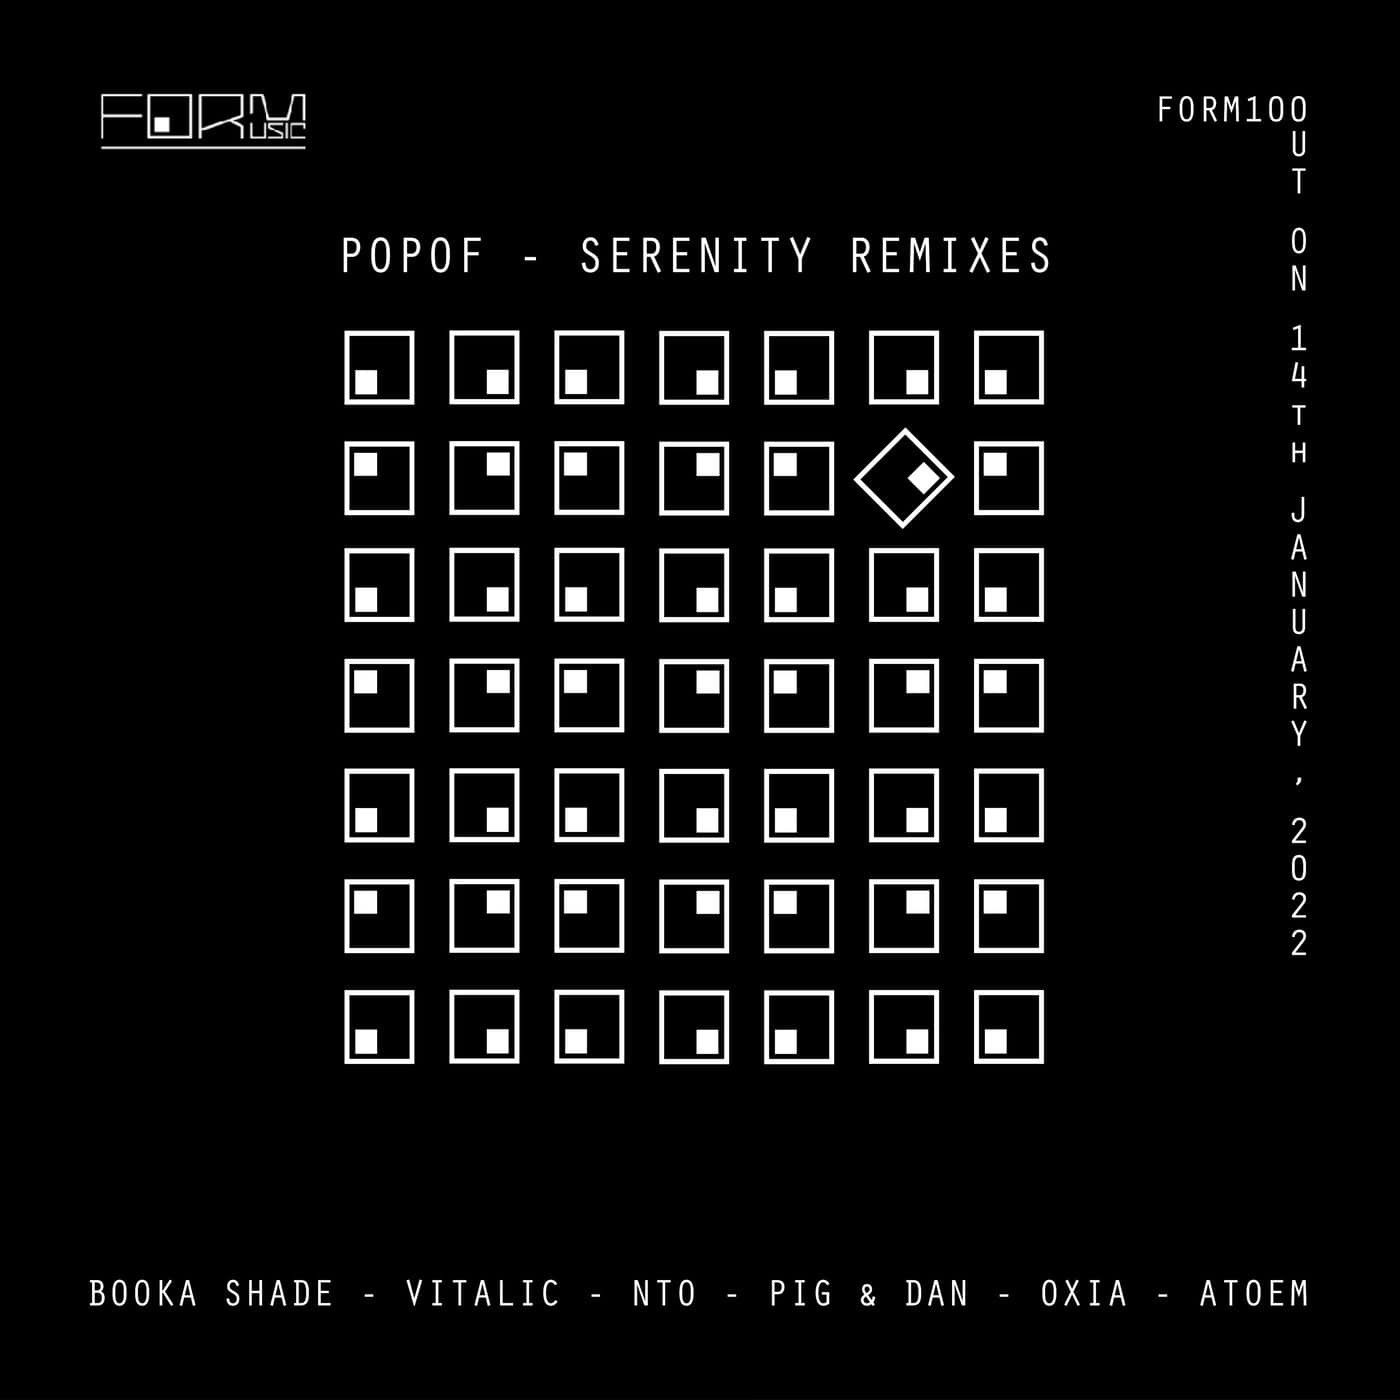 image cover: Popof - Serenity Remixes / FORM100